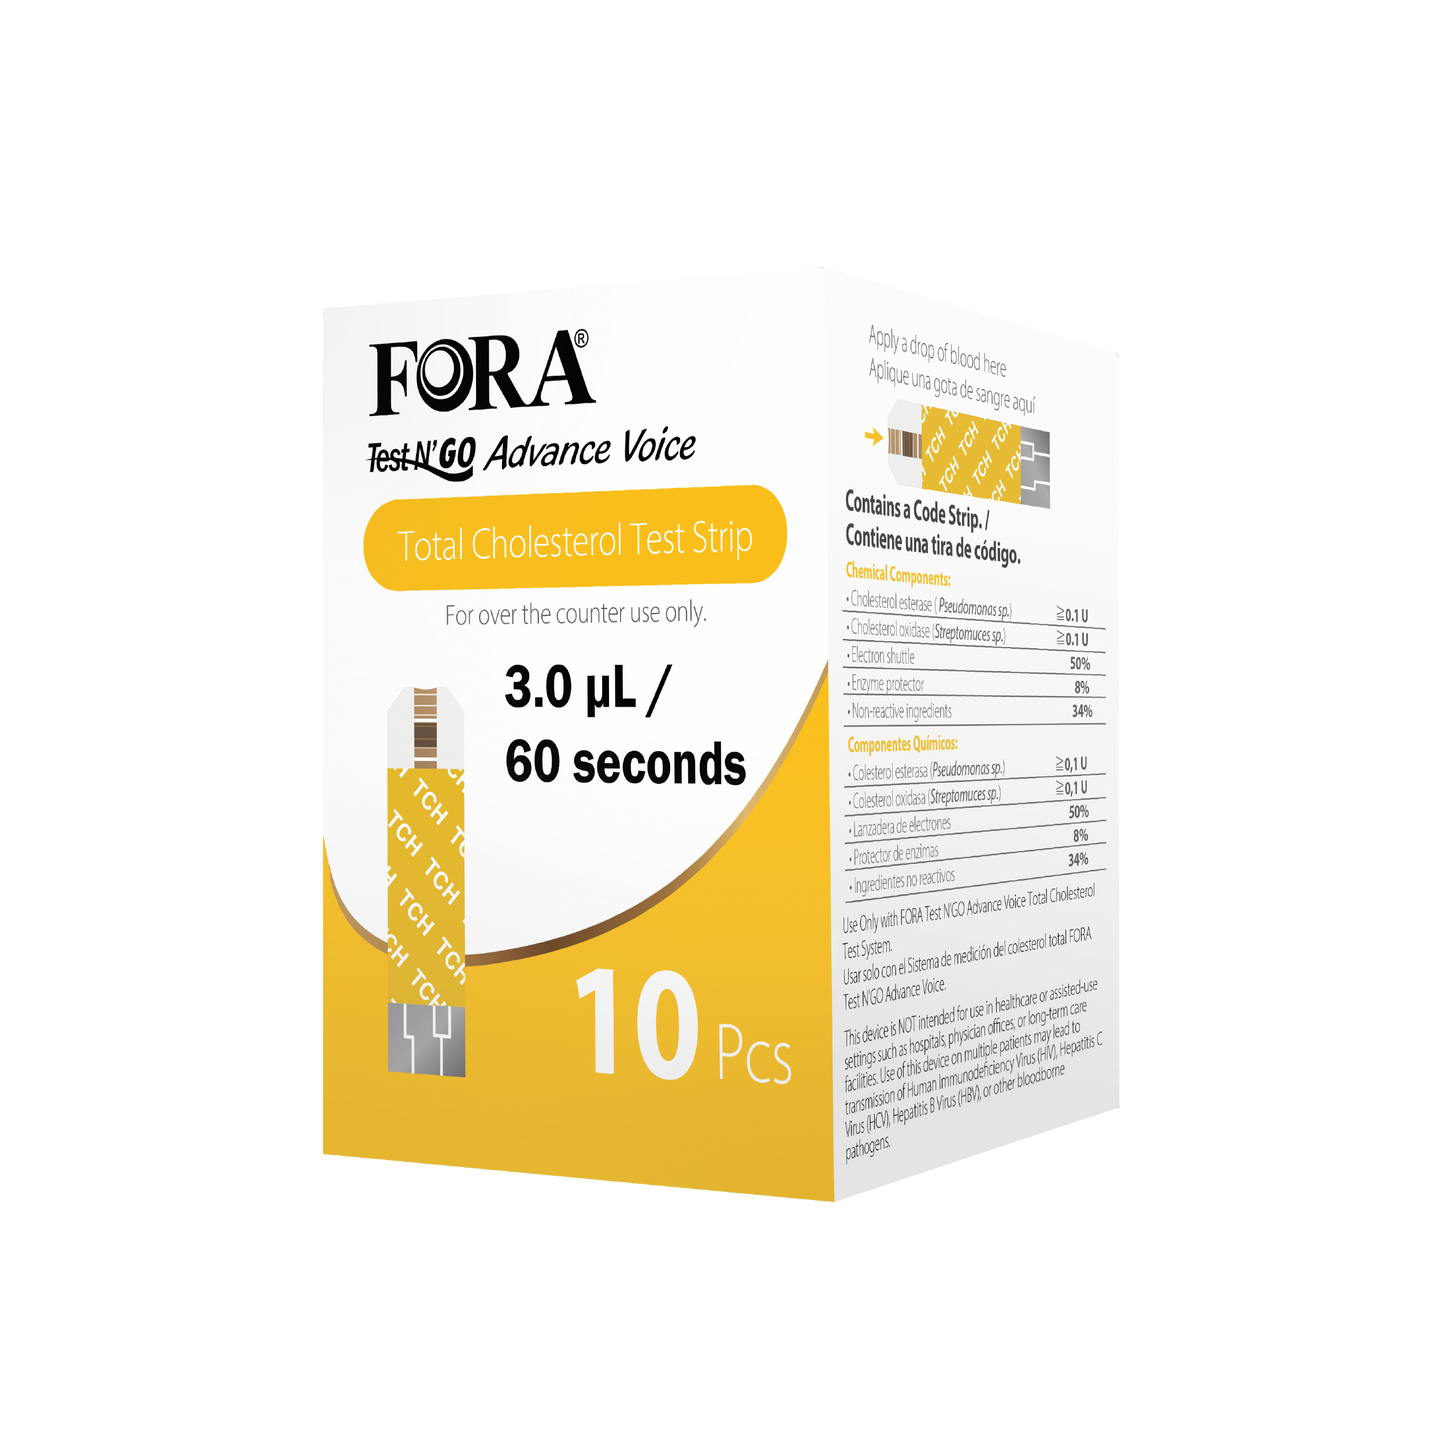 FORA Blood Total Cholesterol Test Strips (10pcs/box, Compatible with FORA Test N'Go Advance Voice Meter)